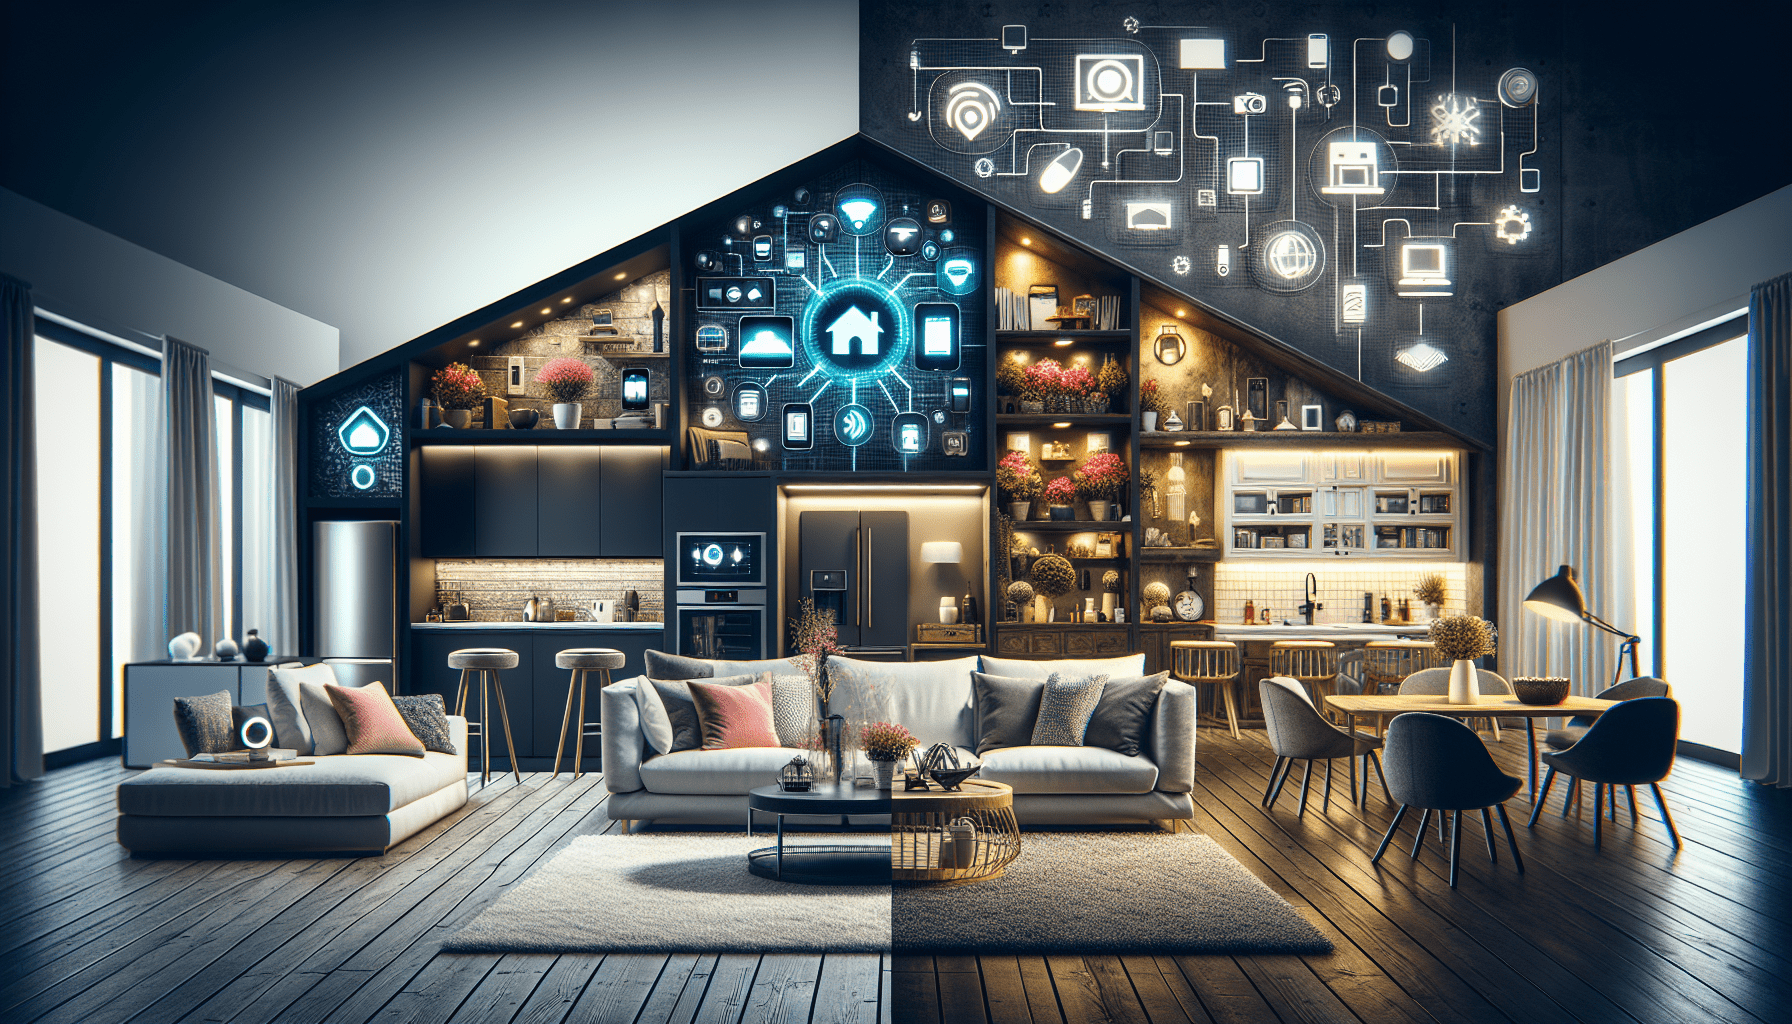 What Is The Difference Between A Smart Home And A Normal Home?